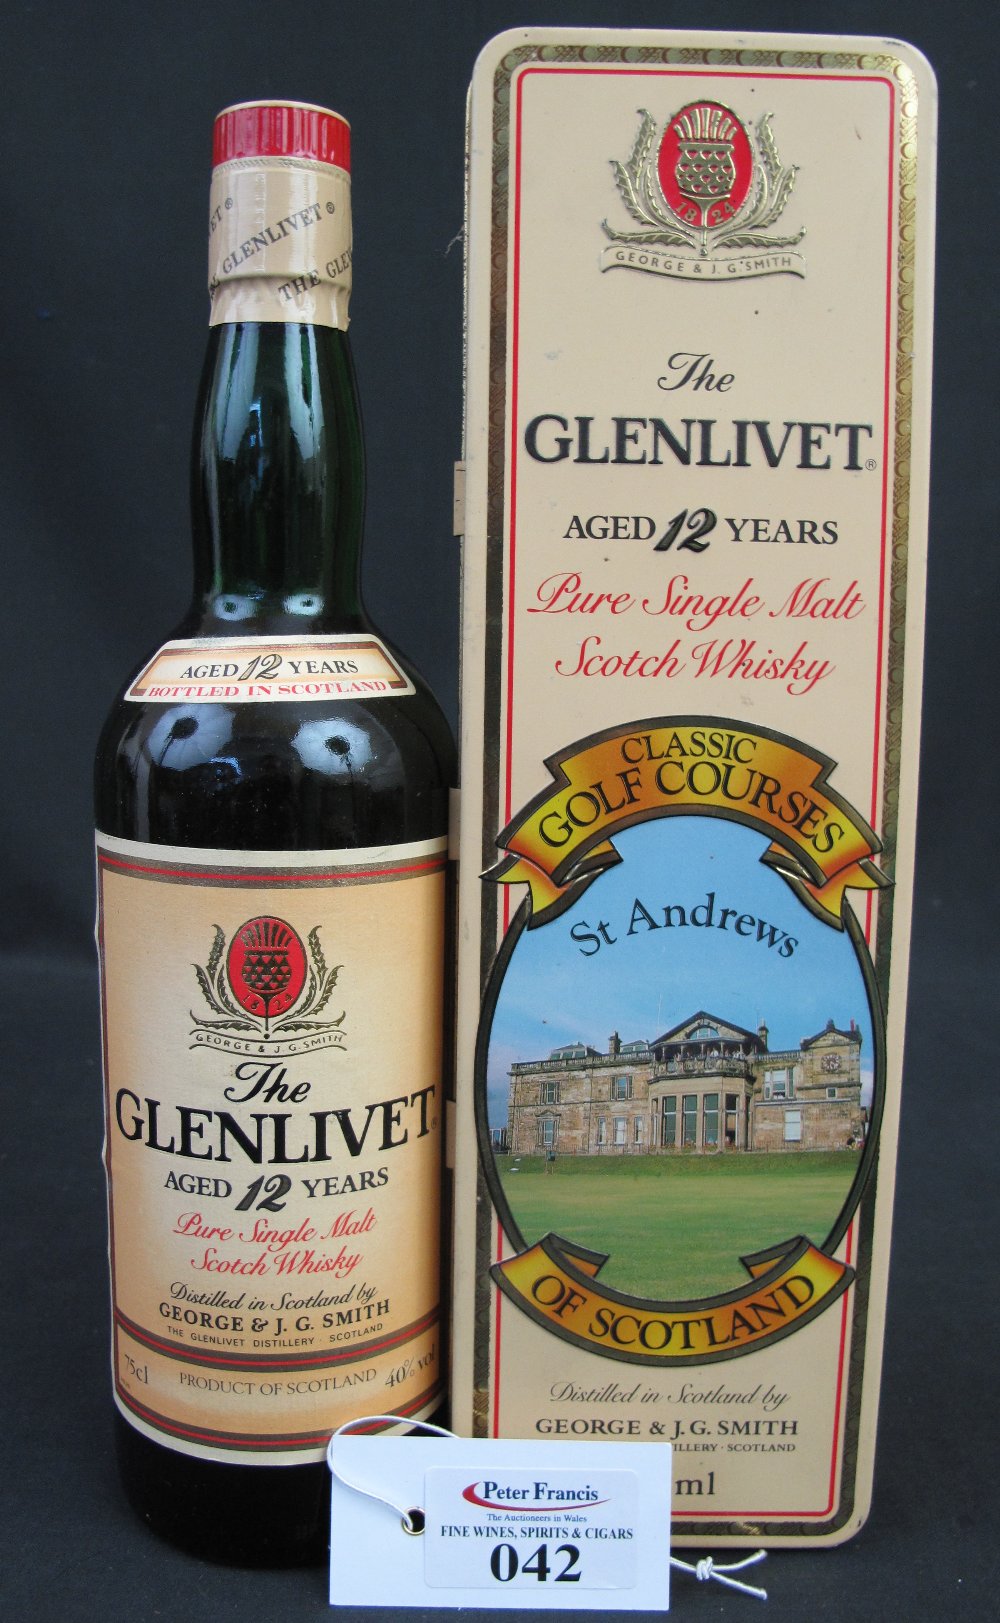 Glenlivet aged 12 years, Pure Single Mal